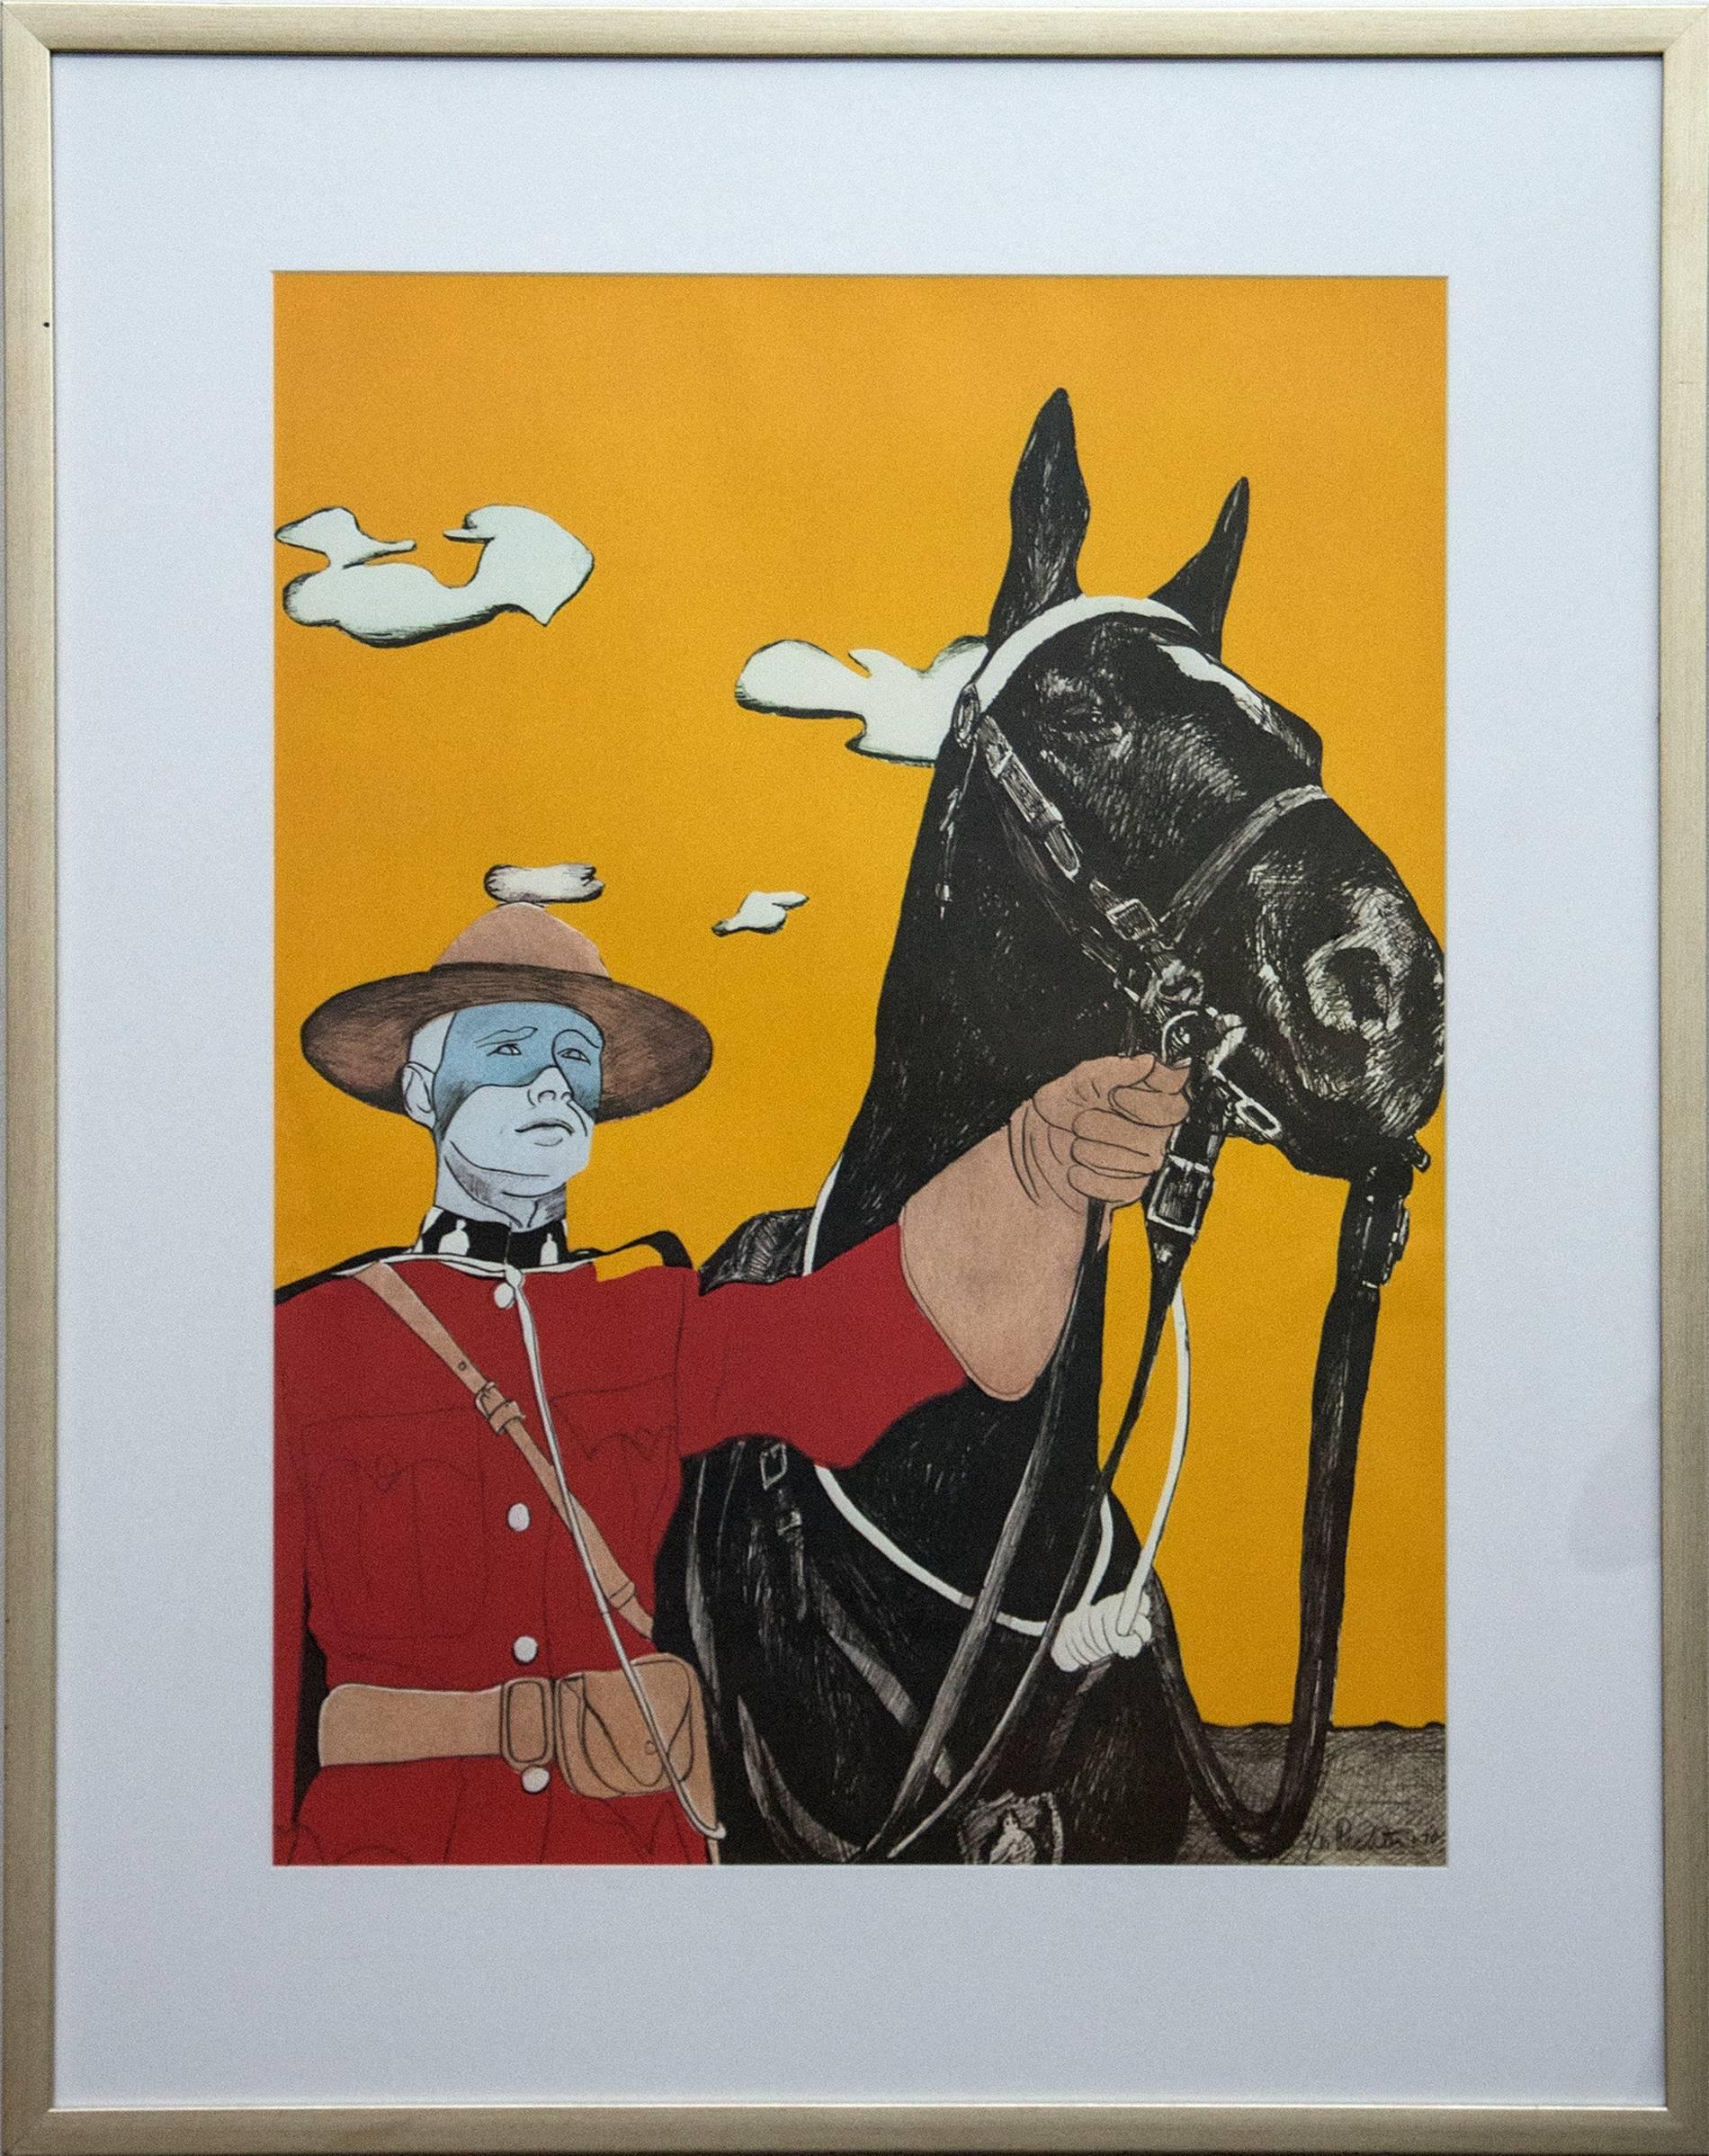 Charles Pachter Figurative Print - Nobility Obliges 3/10 - pop-art, Canadiana, iconic, contemporary, giclee print